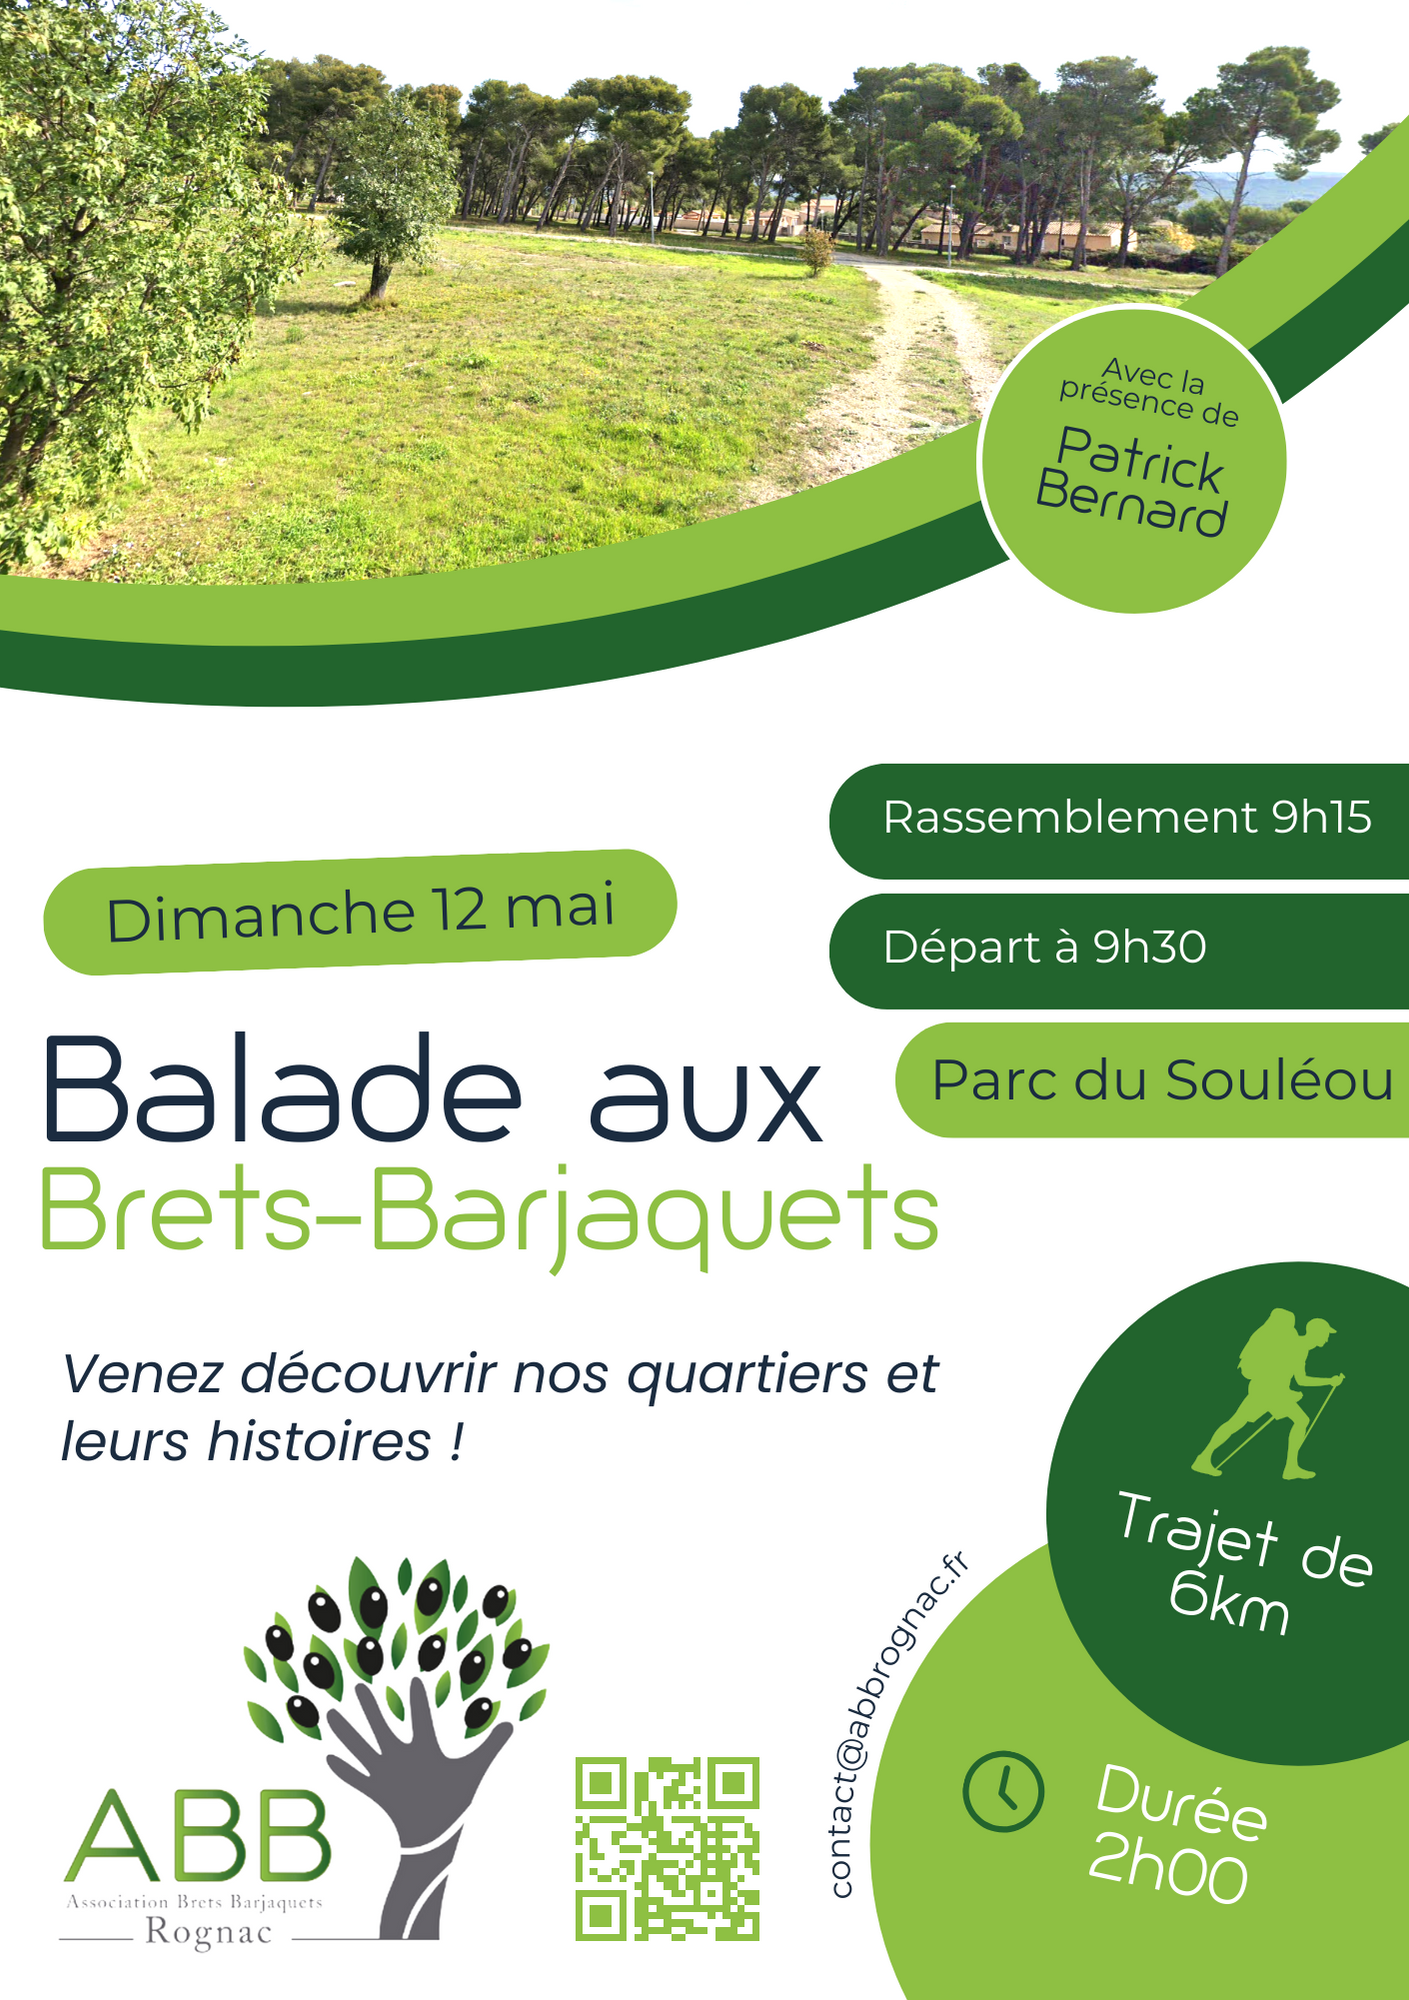 You are currently viewing Balade aux Brets Barjaquets